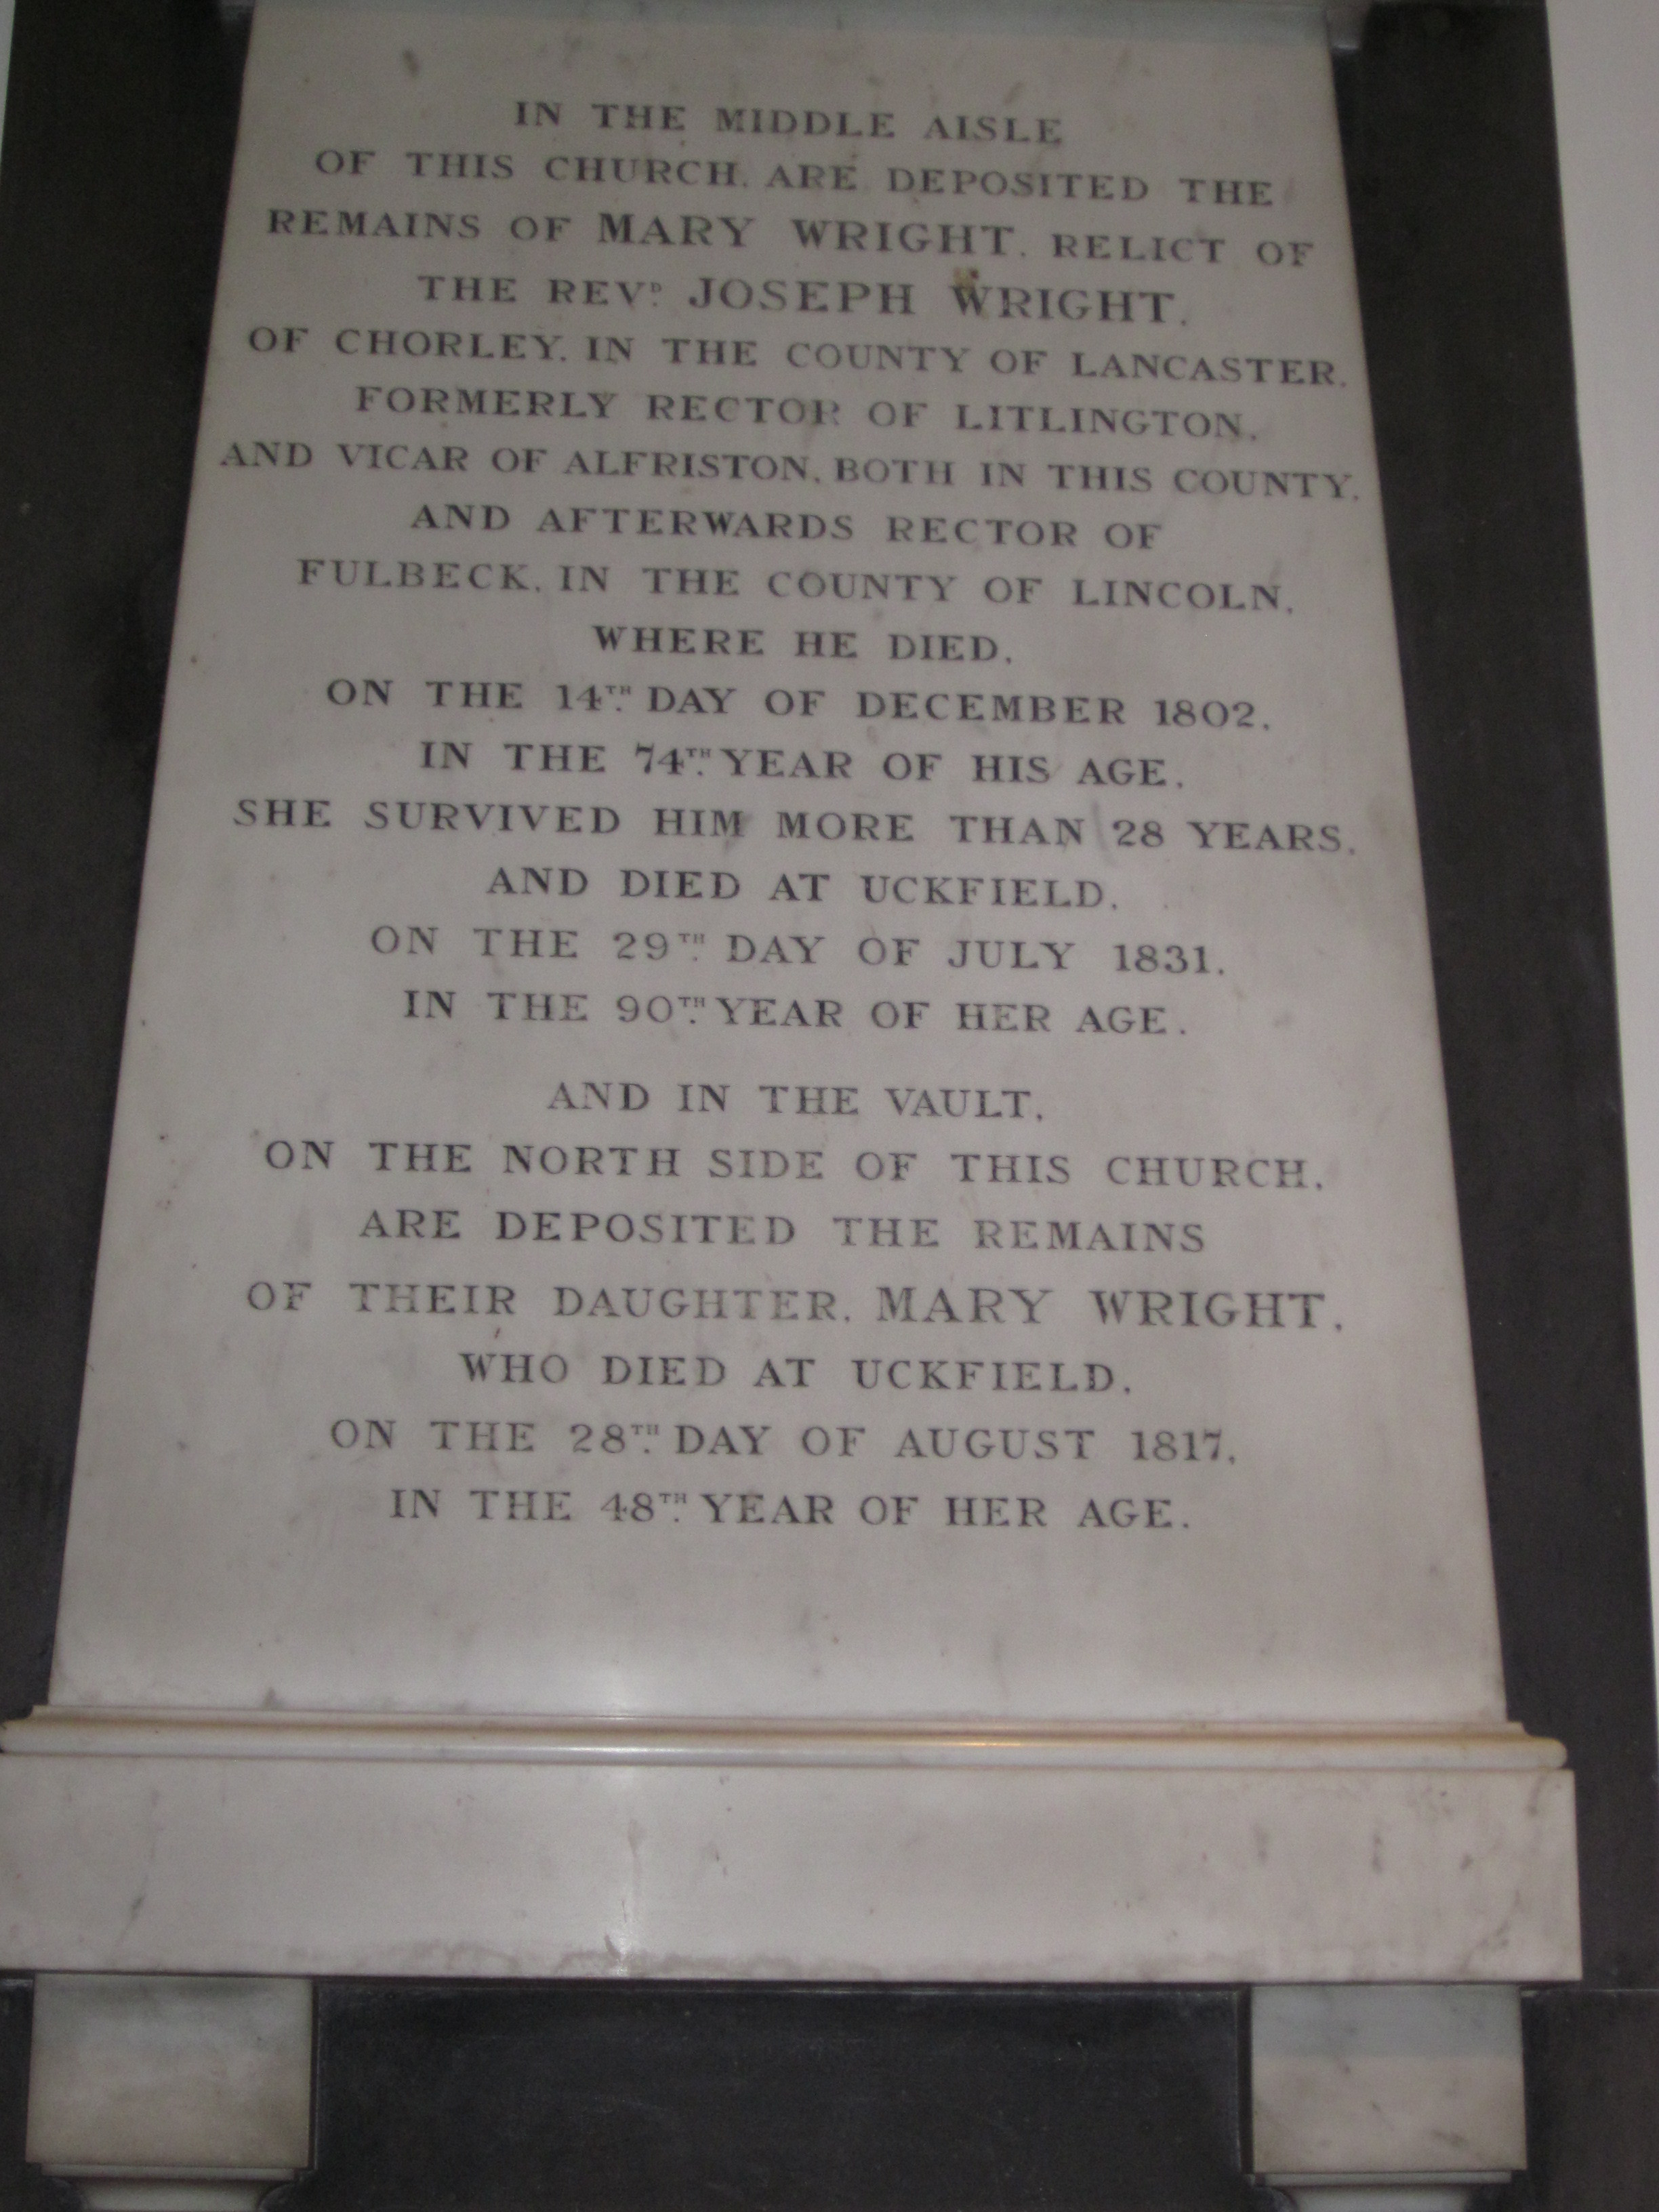 "In the middle aisle of this church are deposited the remains of Mary Wright relict of the Revd Joseph Wright of Chorley in the County of Lancaster formerly Rector of Litlington and Vicar of Alfriston both in thisd County and afterwards Rector of Fulbeck in the County of Lincoln where he died on the 14th Day of December 1802 in the 74th year of his age. She survived him more than 28 years and died at Uckfield on the 29th day of July 1831 in the 90th year of her age.